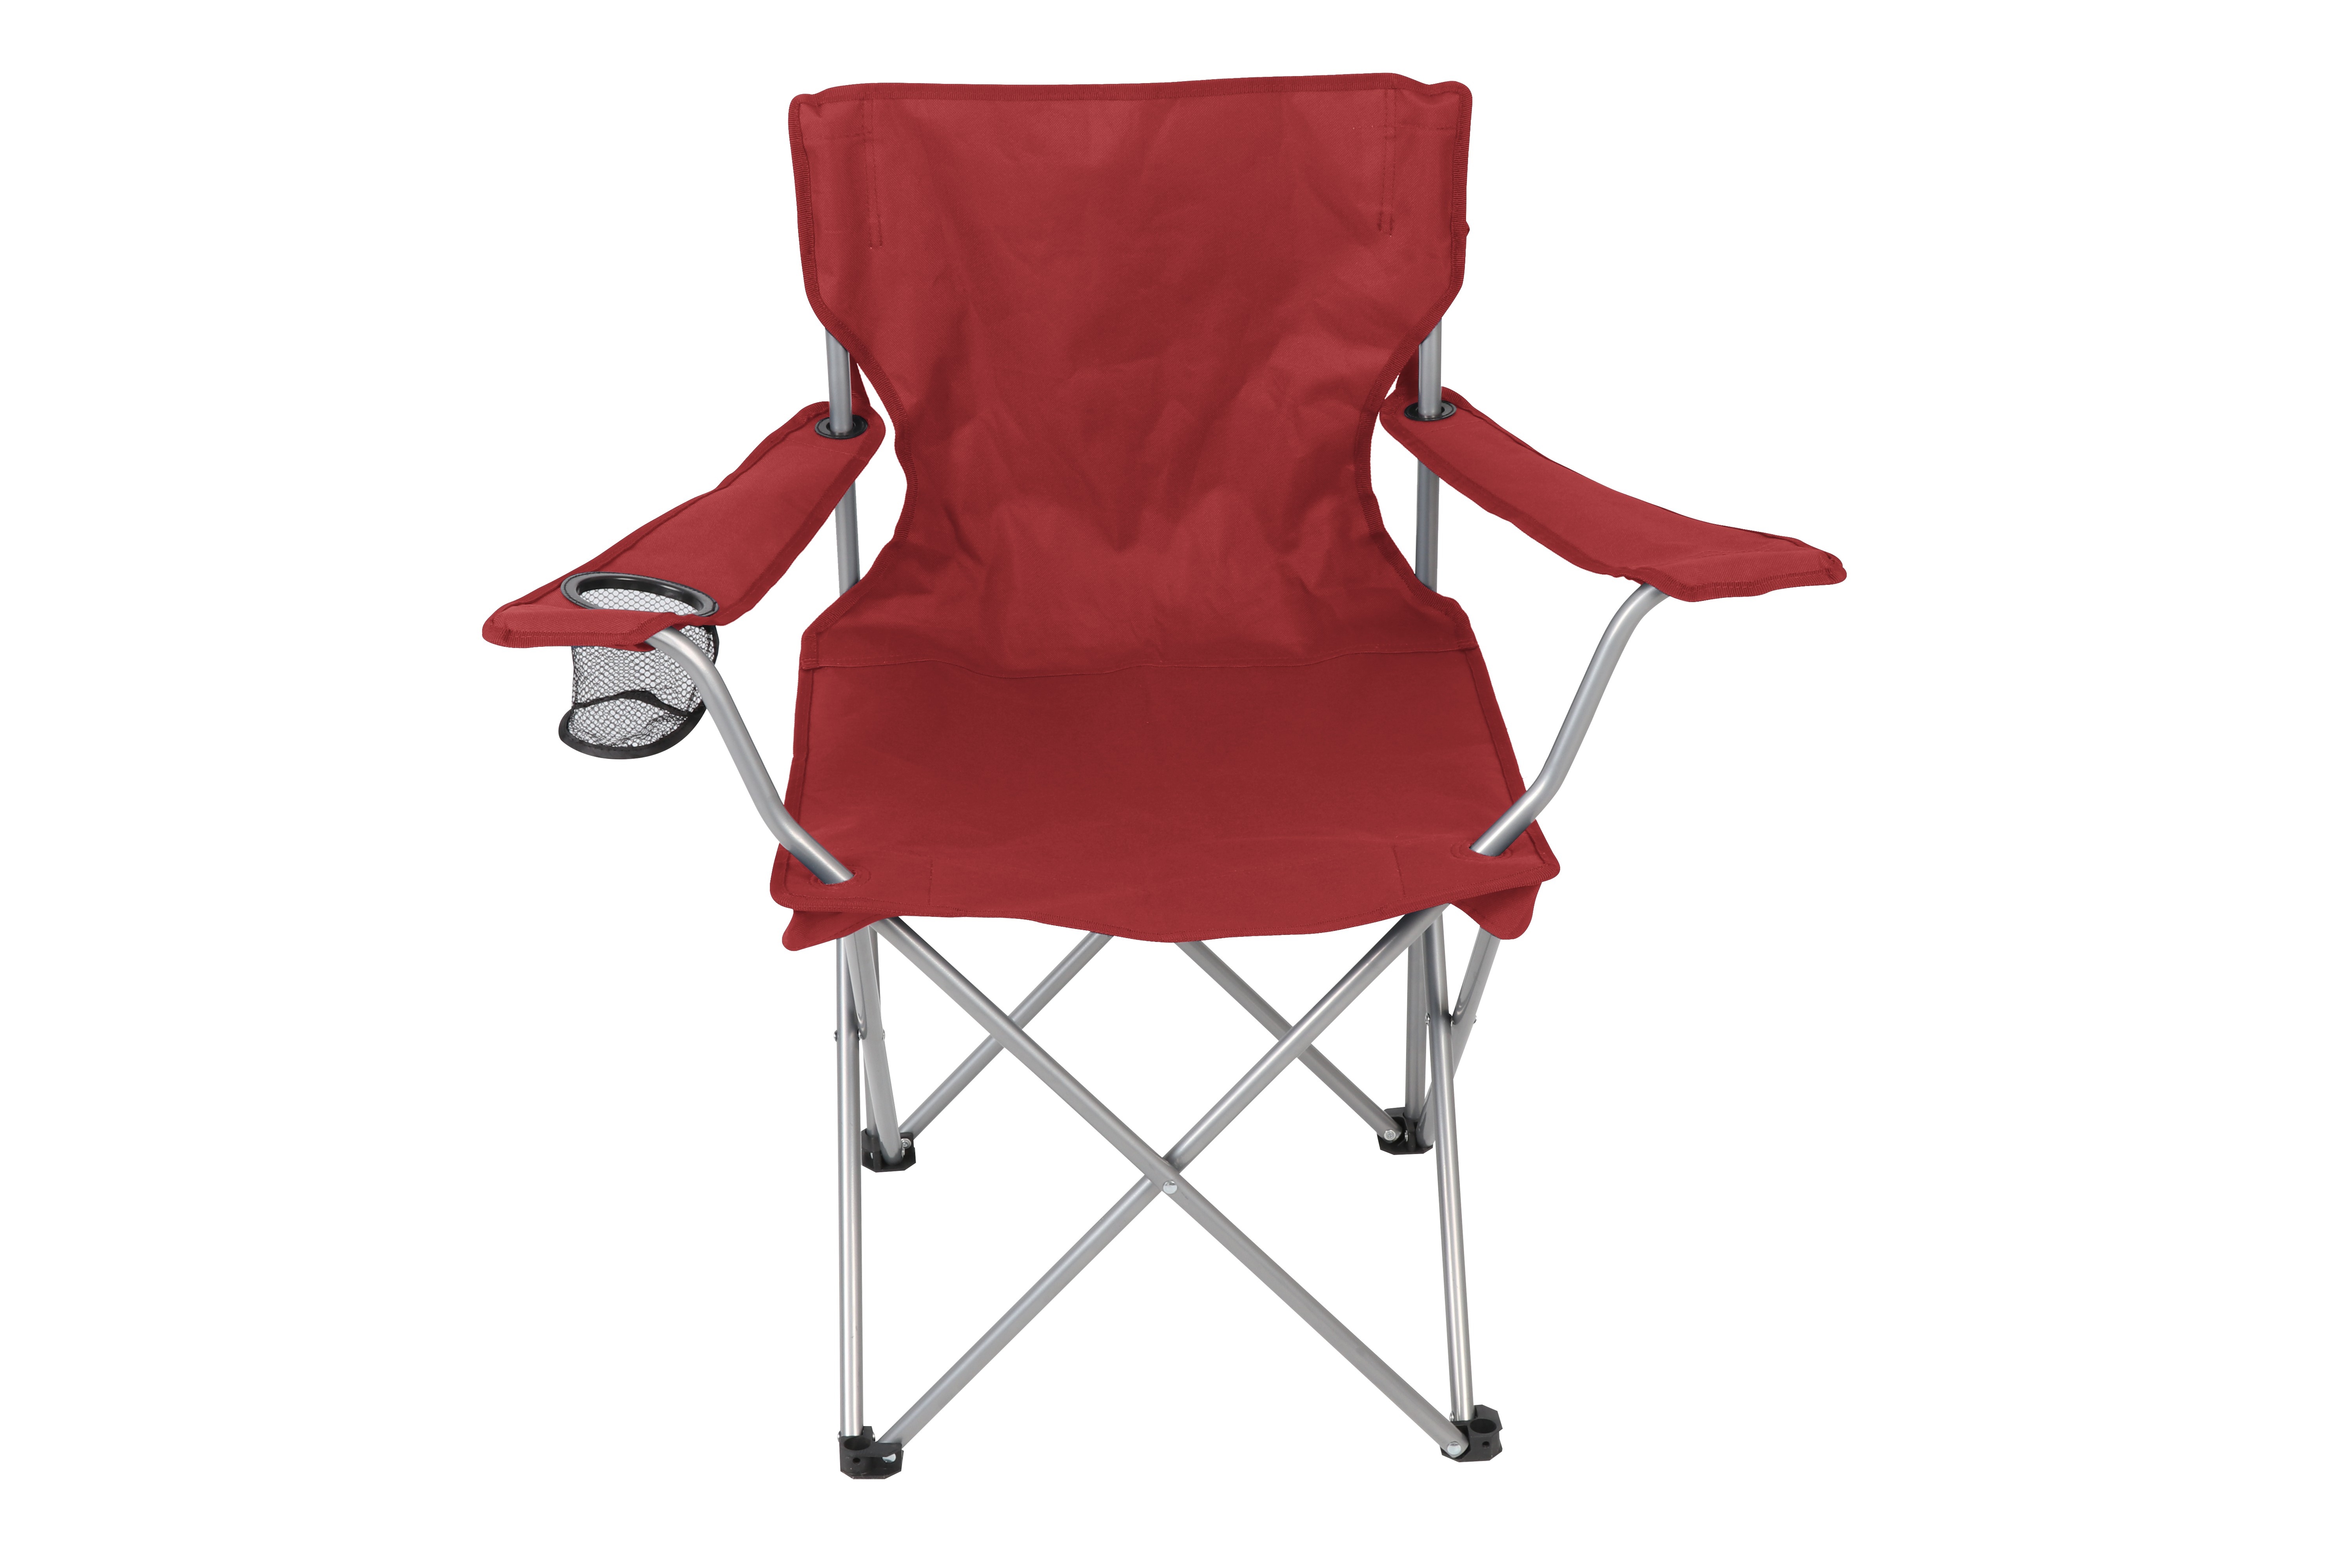 Ozark Trail Basic Quad Folding Camp Chair with Cup Holder, Red, Adult - image 1 of 12